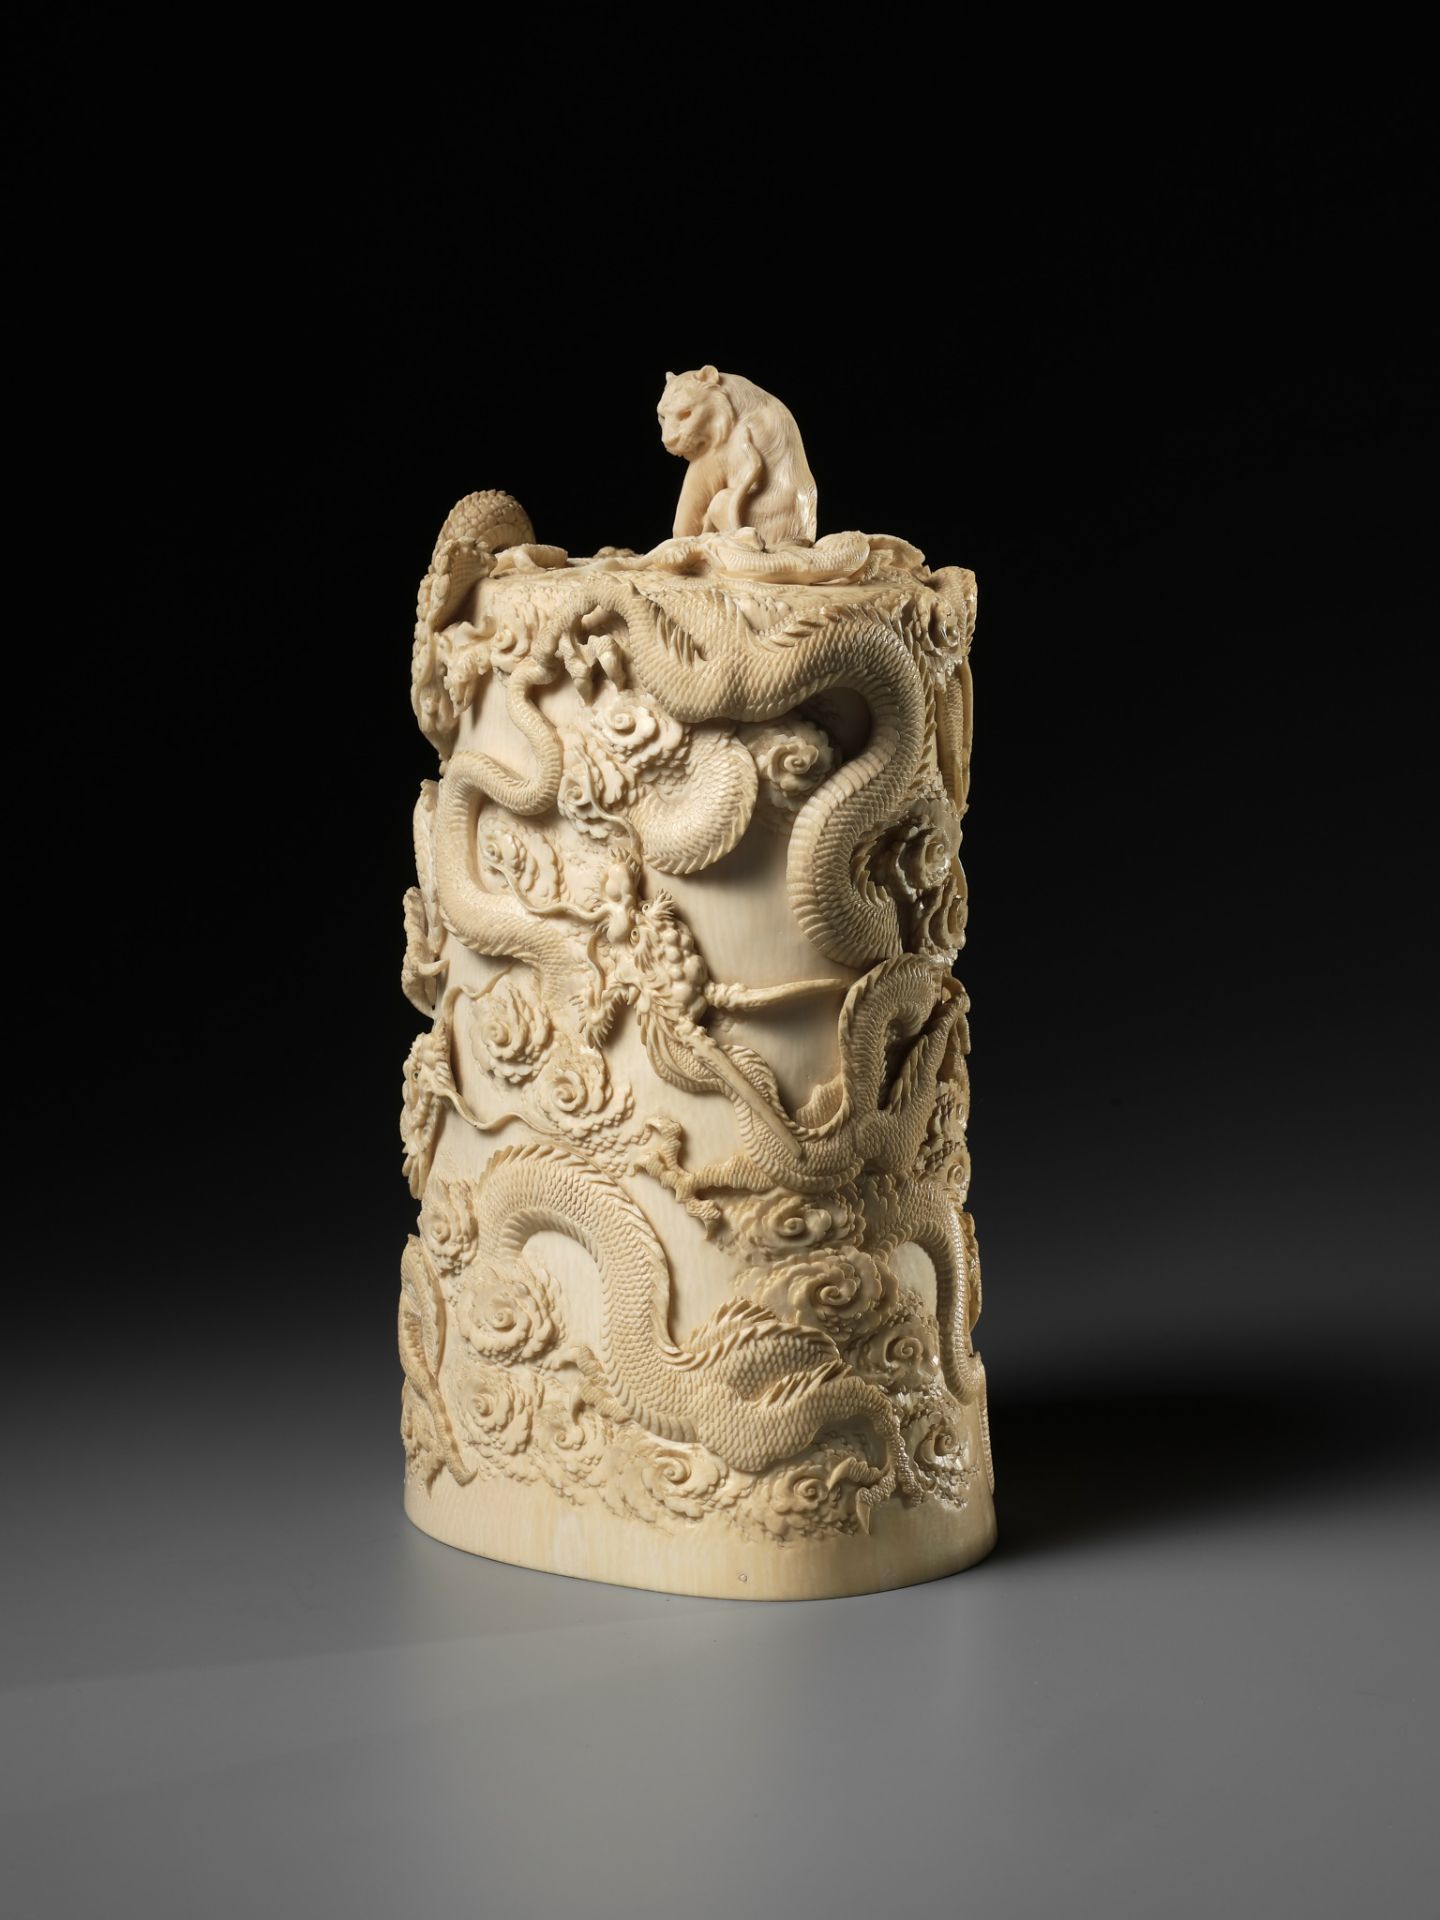 A SUPERB AND LARGE IVORY TUSK BOX AND COVER DEPICTING A TIGER AND DRAGONS - Image 5 of 13